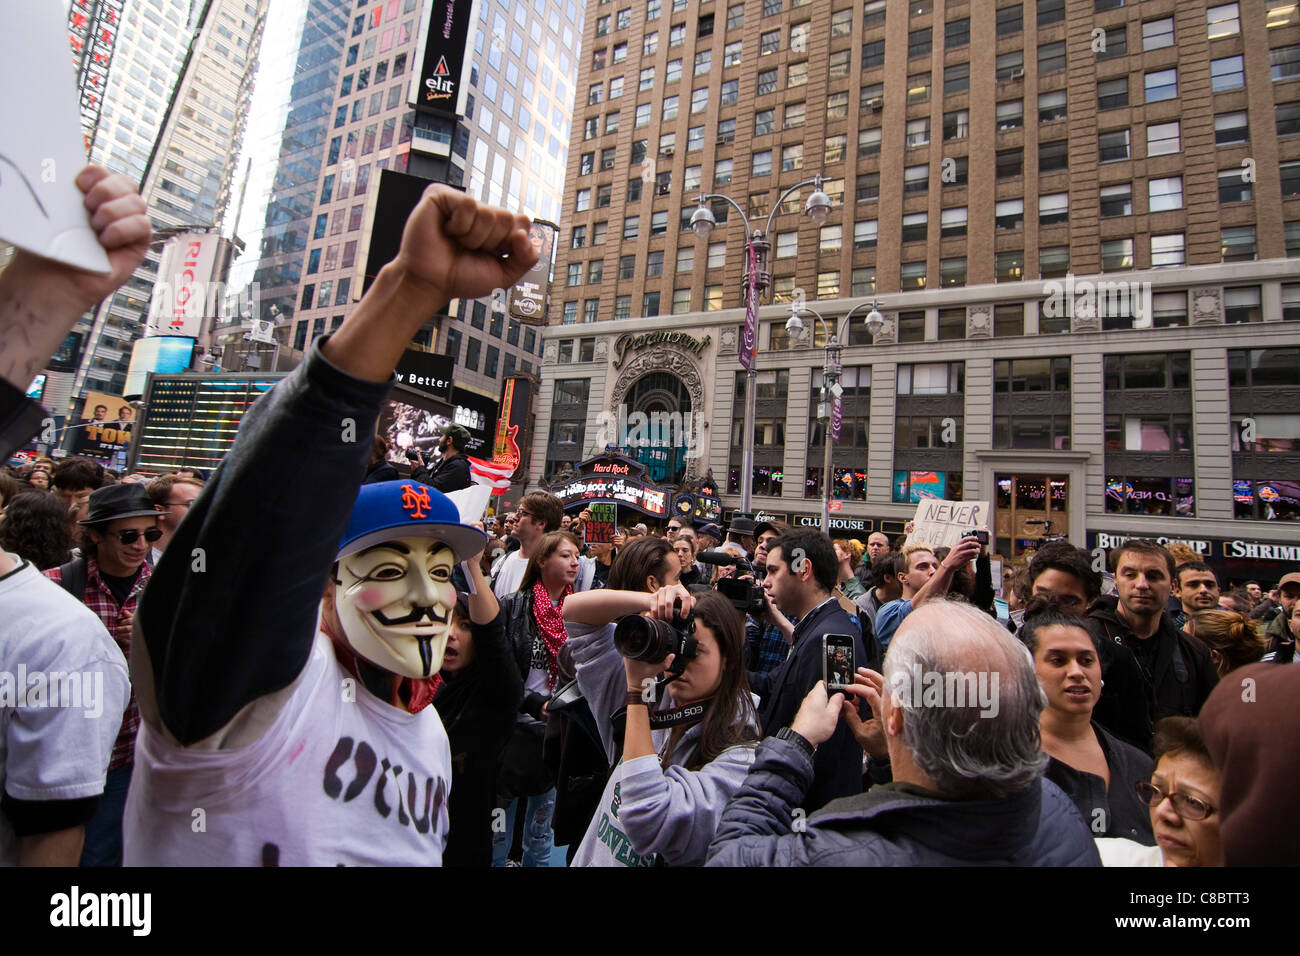 Man wearing Guy Fawkes mask at an Occupy Wall Street Protest march in Times  Square, New York City. October 15, 2011 Stock Photo - Alamy